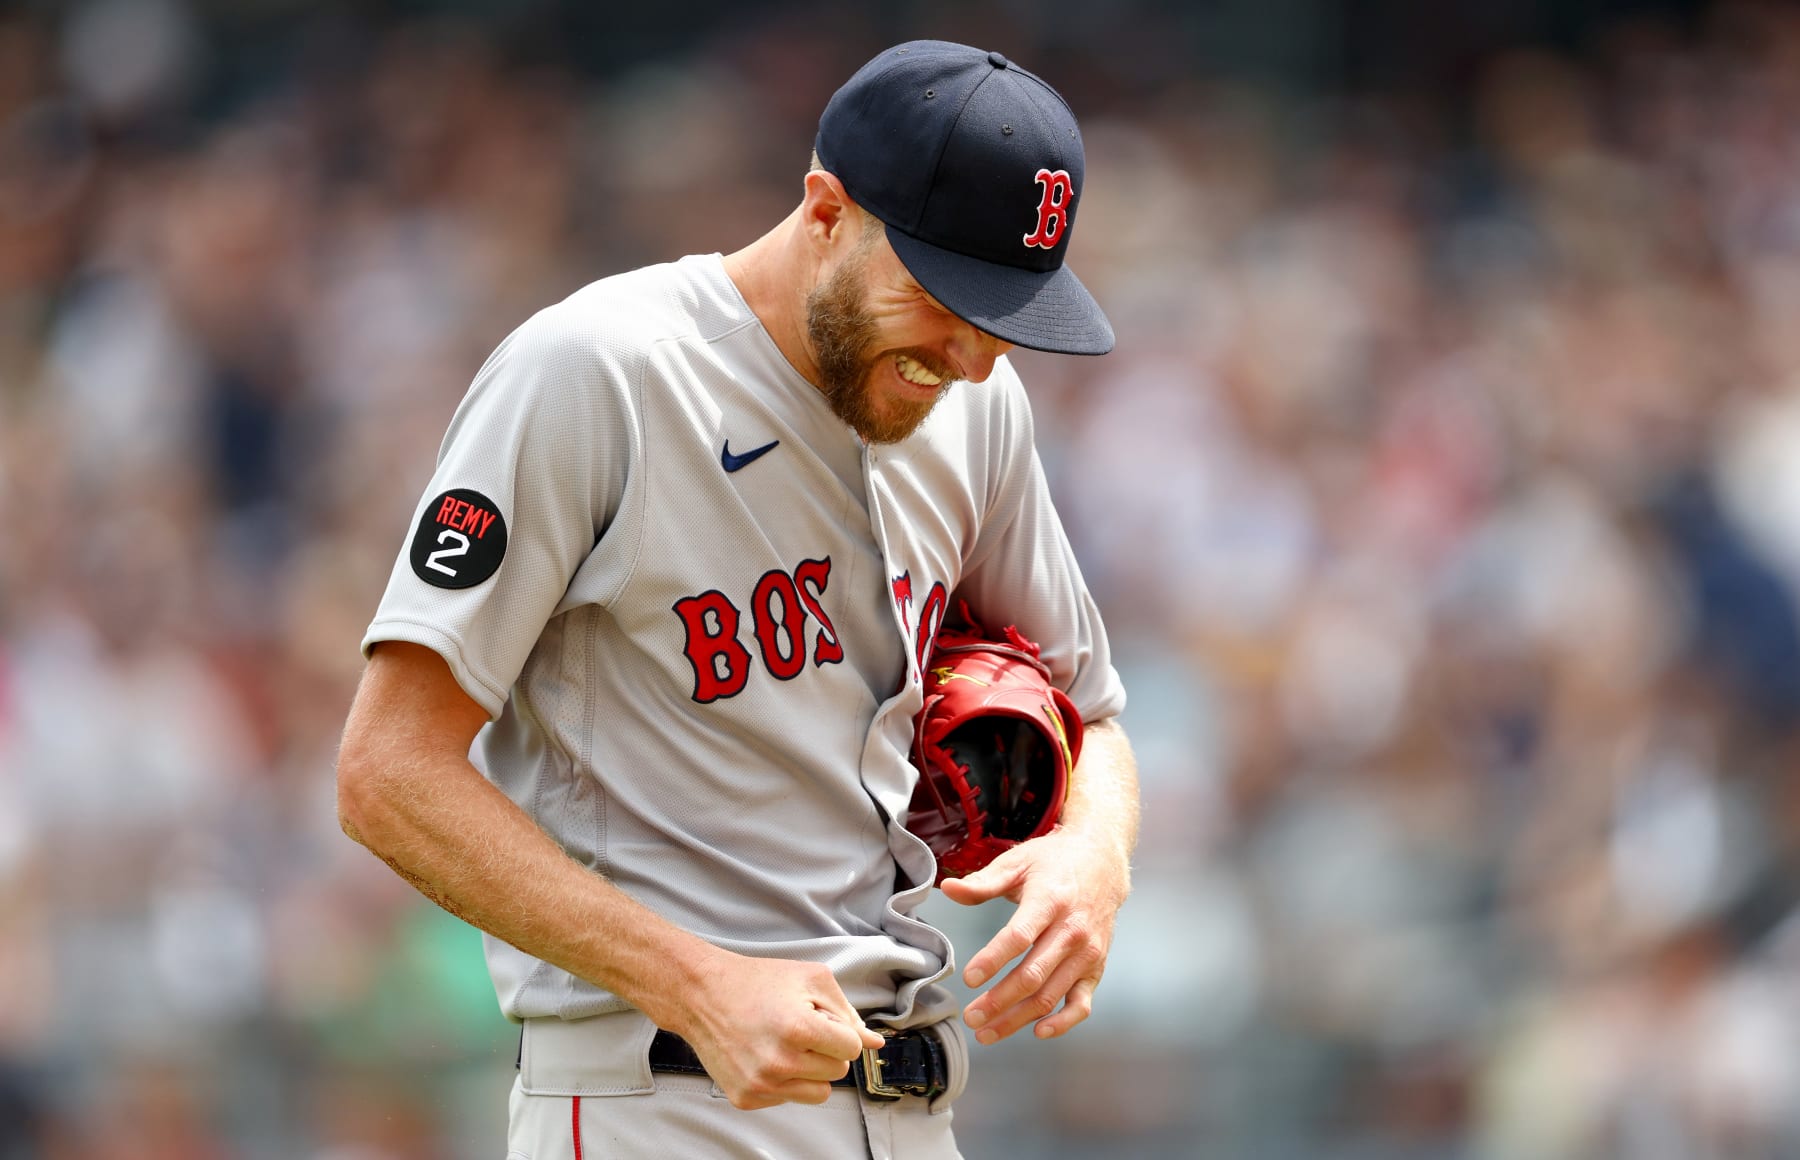 Boston Red Sox pitcher Chris Sale out for season after bike accident